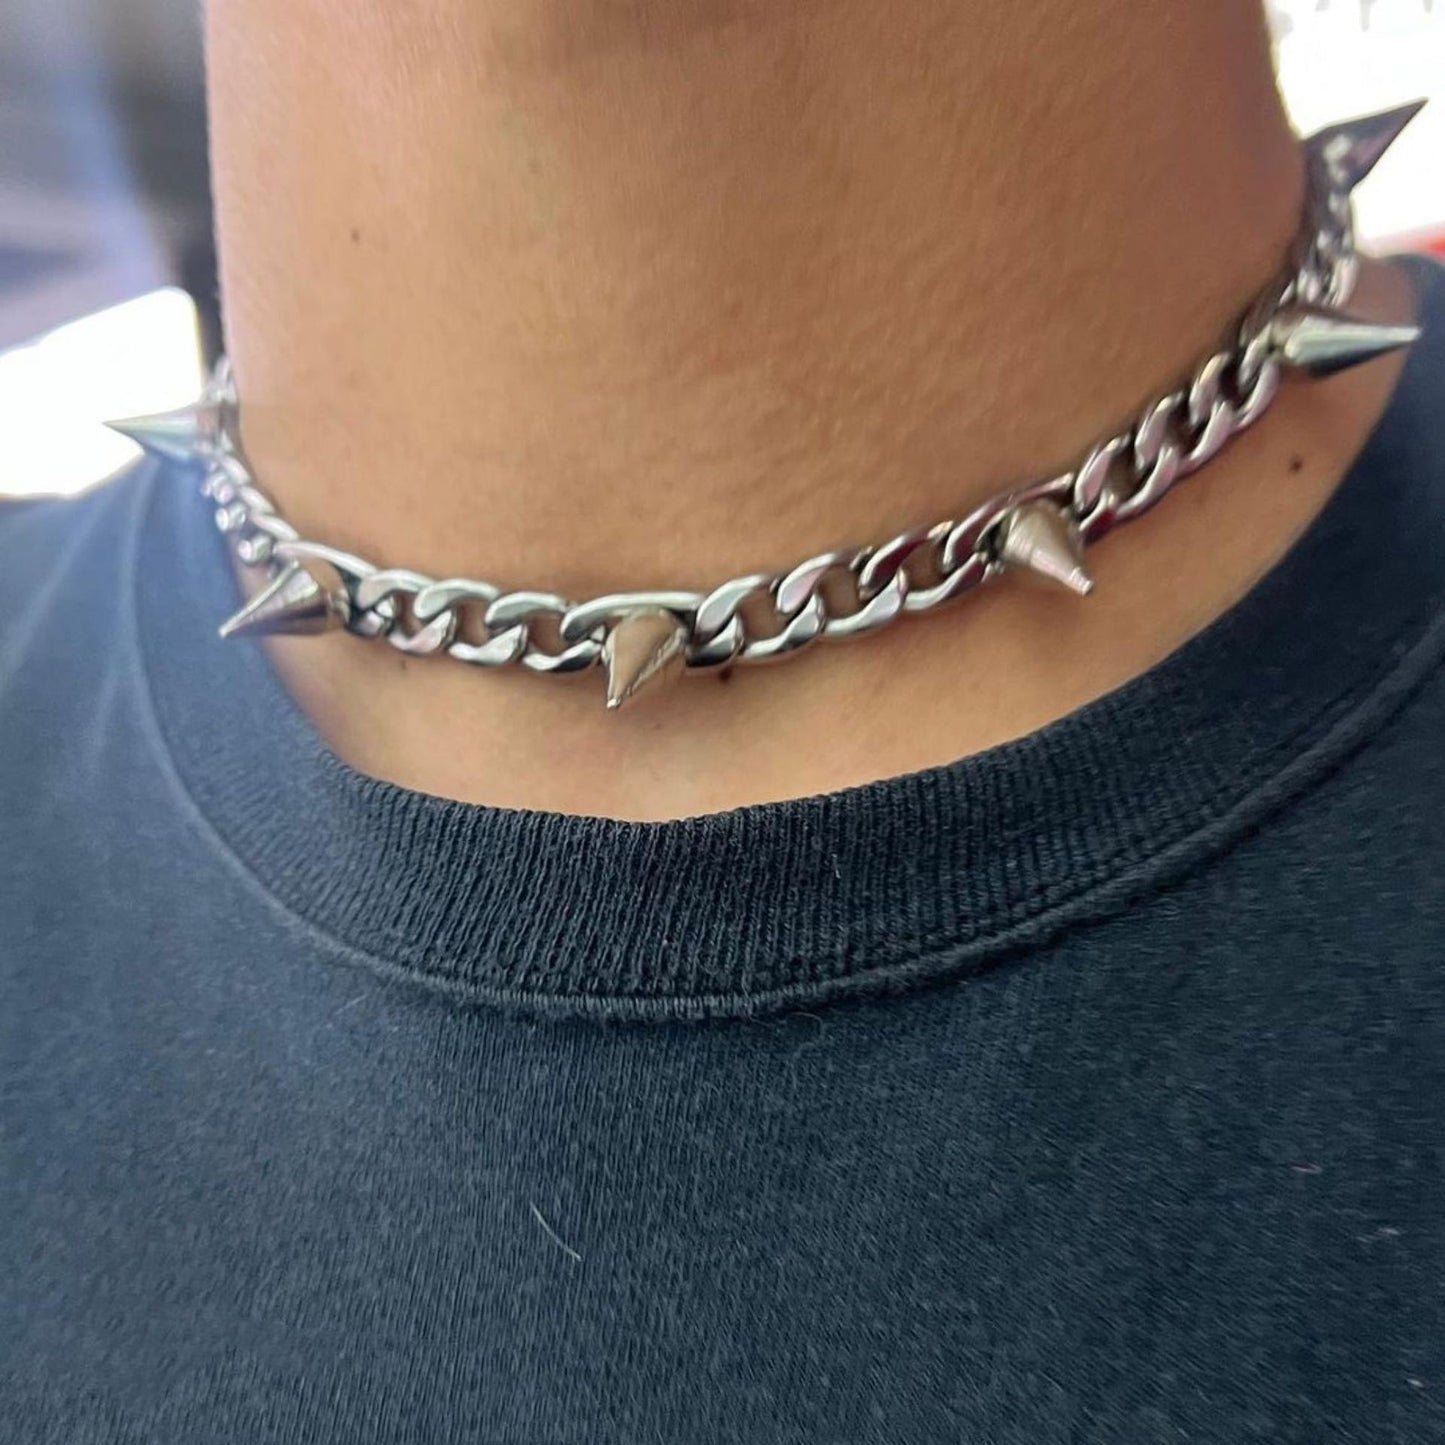 A man wearing a Vintage Punk Rock Neckchain from Maramalive™ with spikes on it.